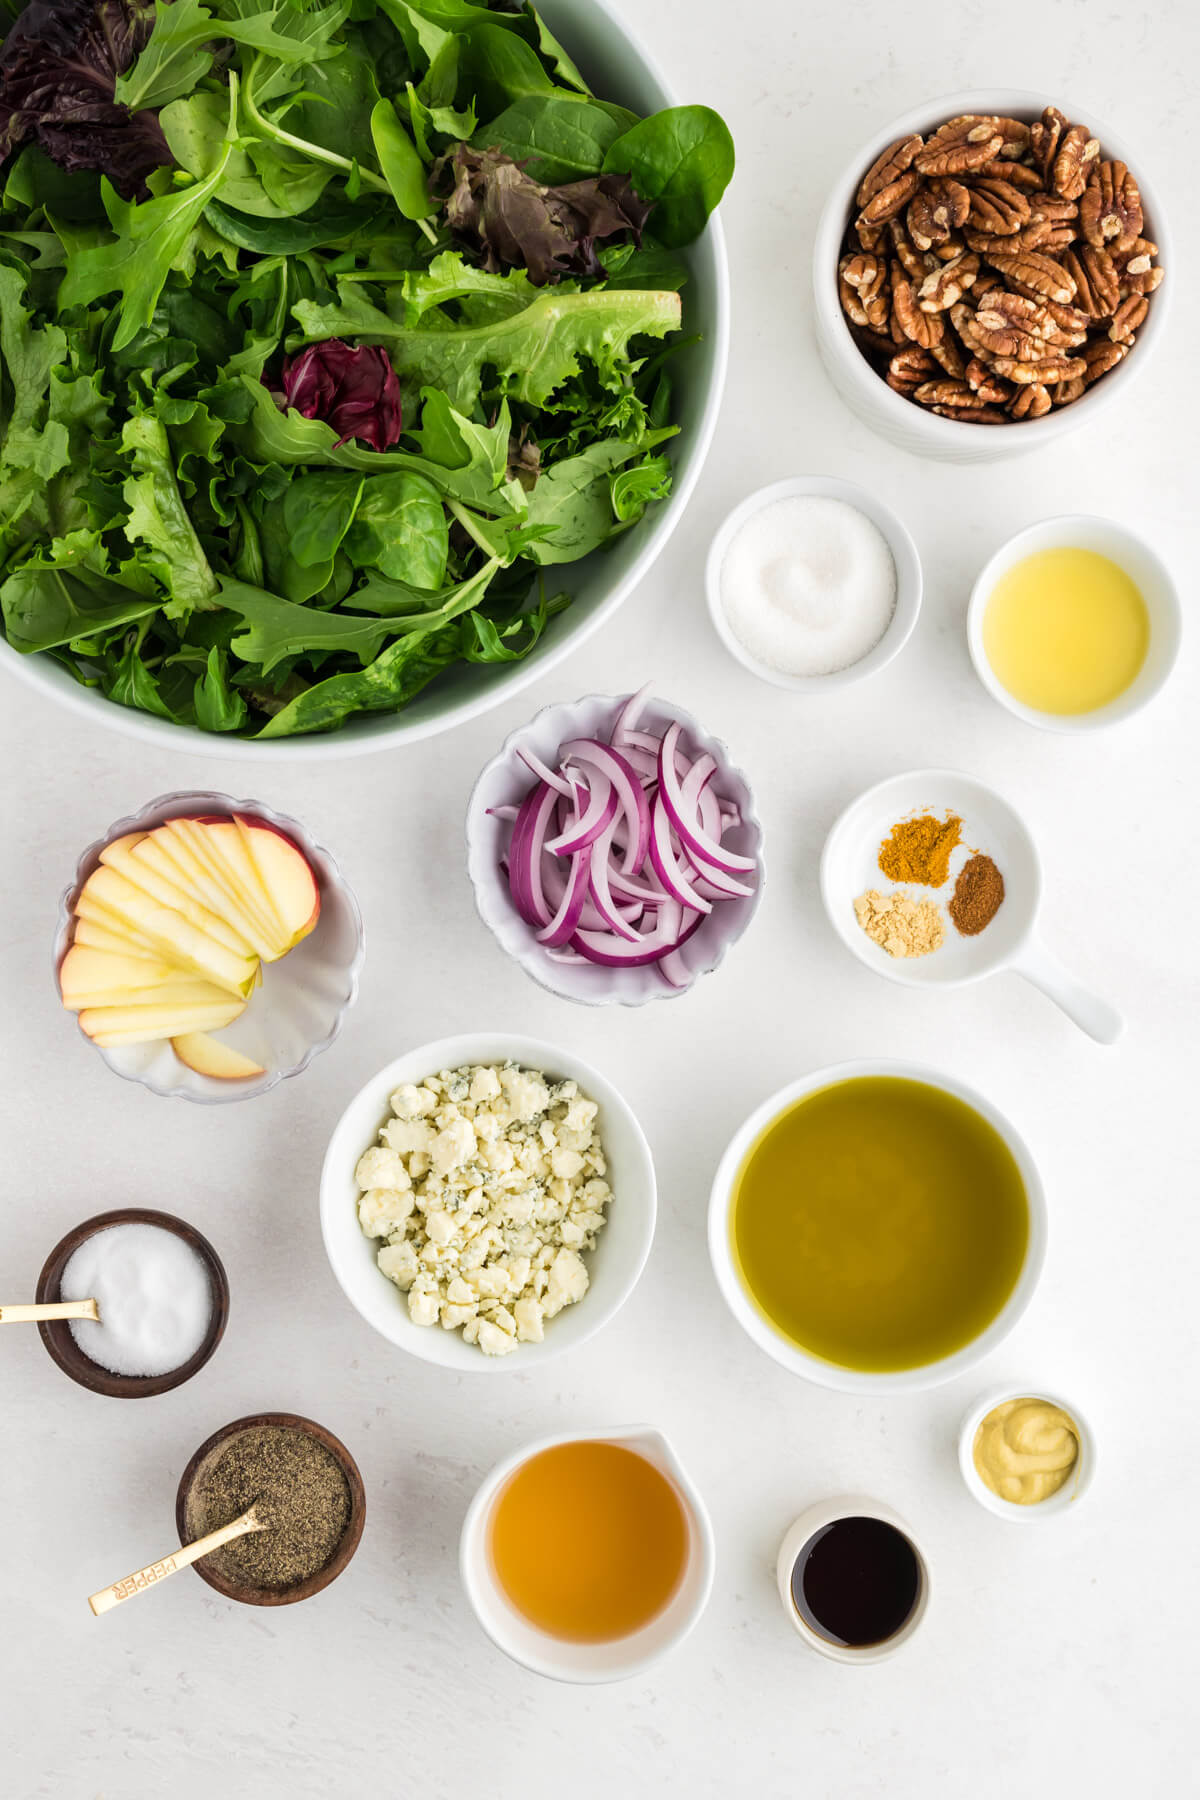 ingredients for winter salad and a vinaigrette on a table.